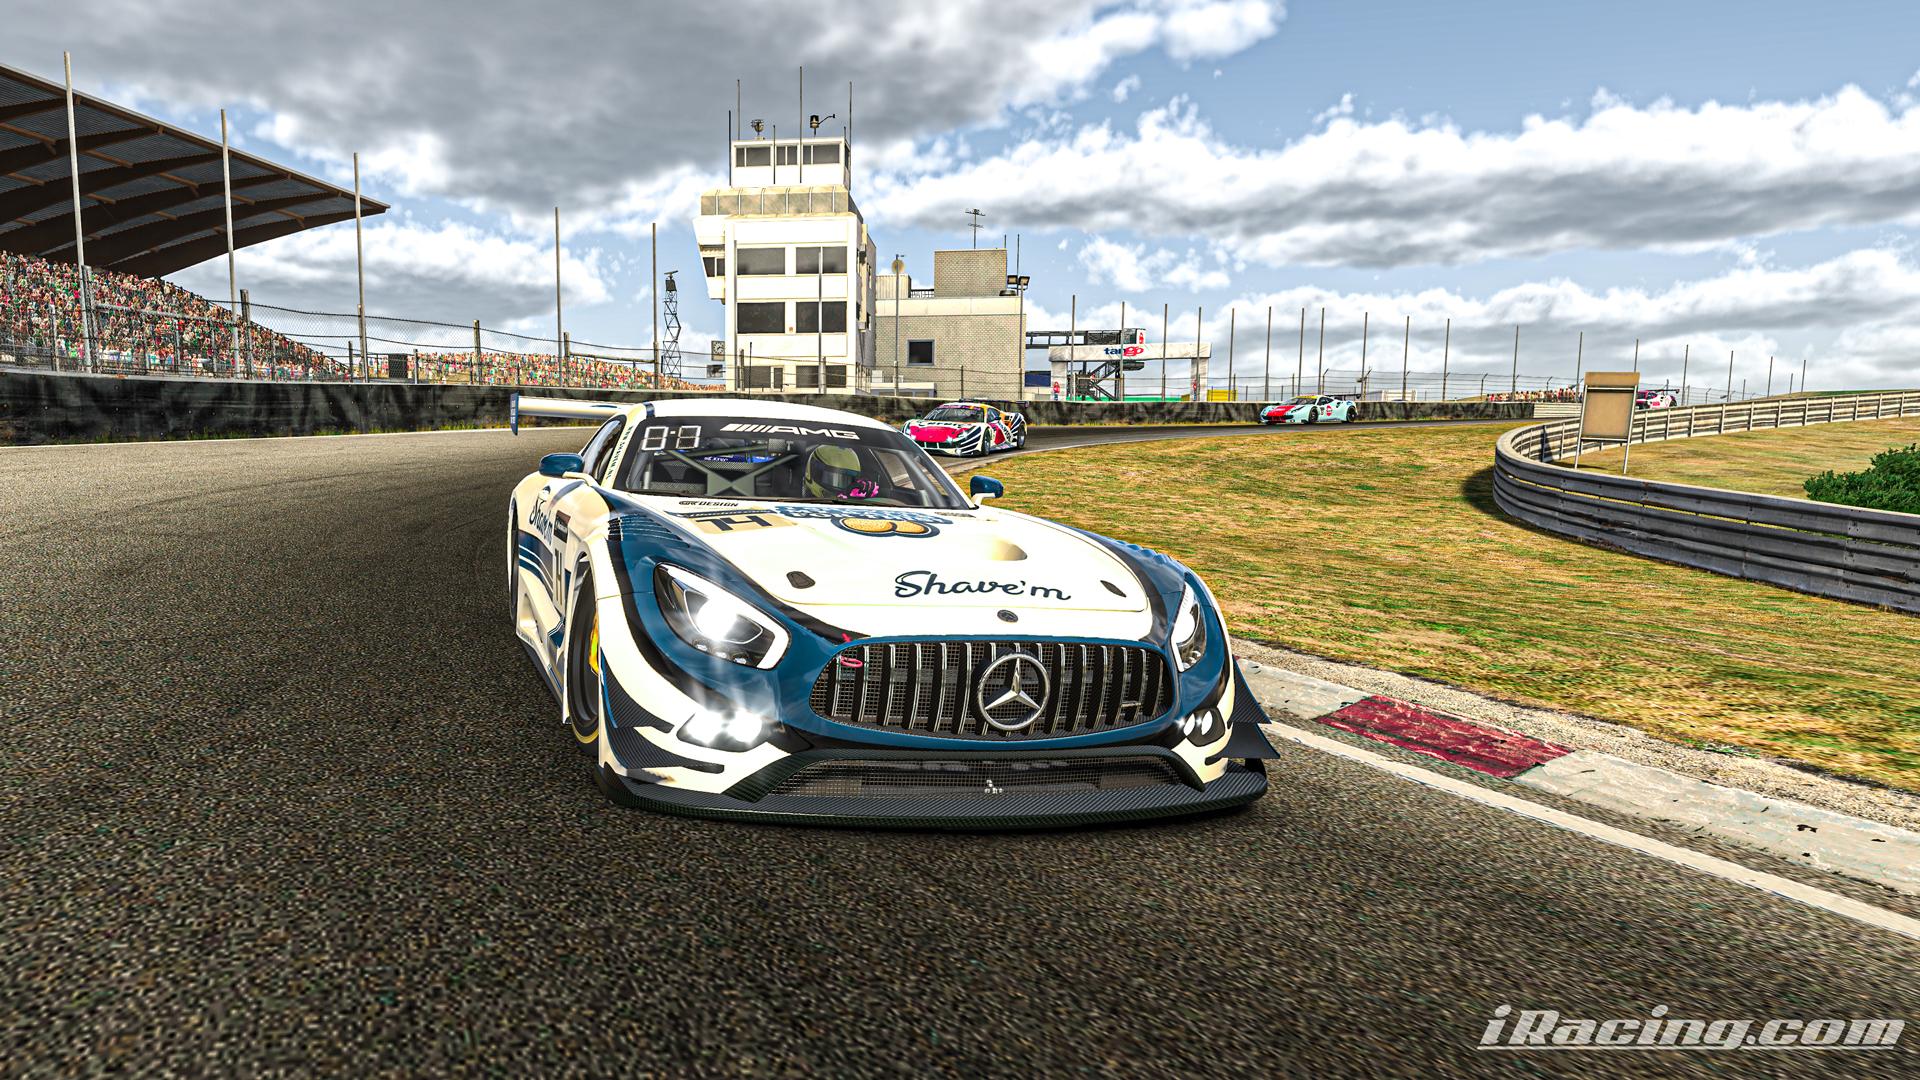 Preview of Shavem Livery - Mercedes AMG GT3 by Gino Kelleners